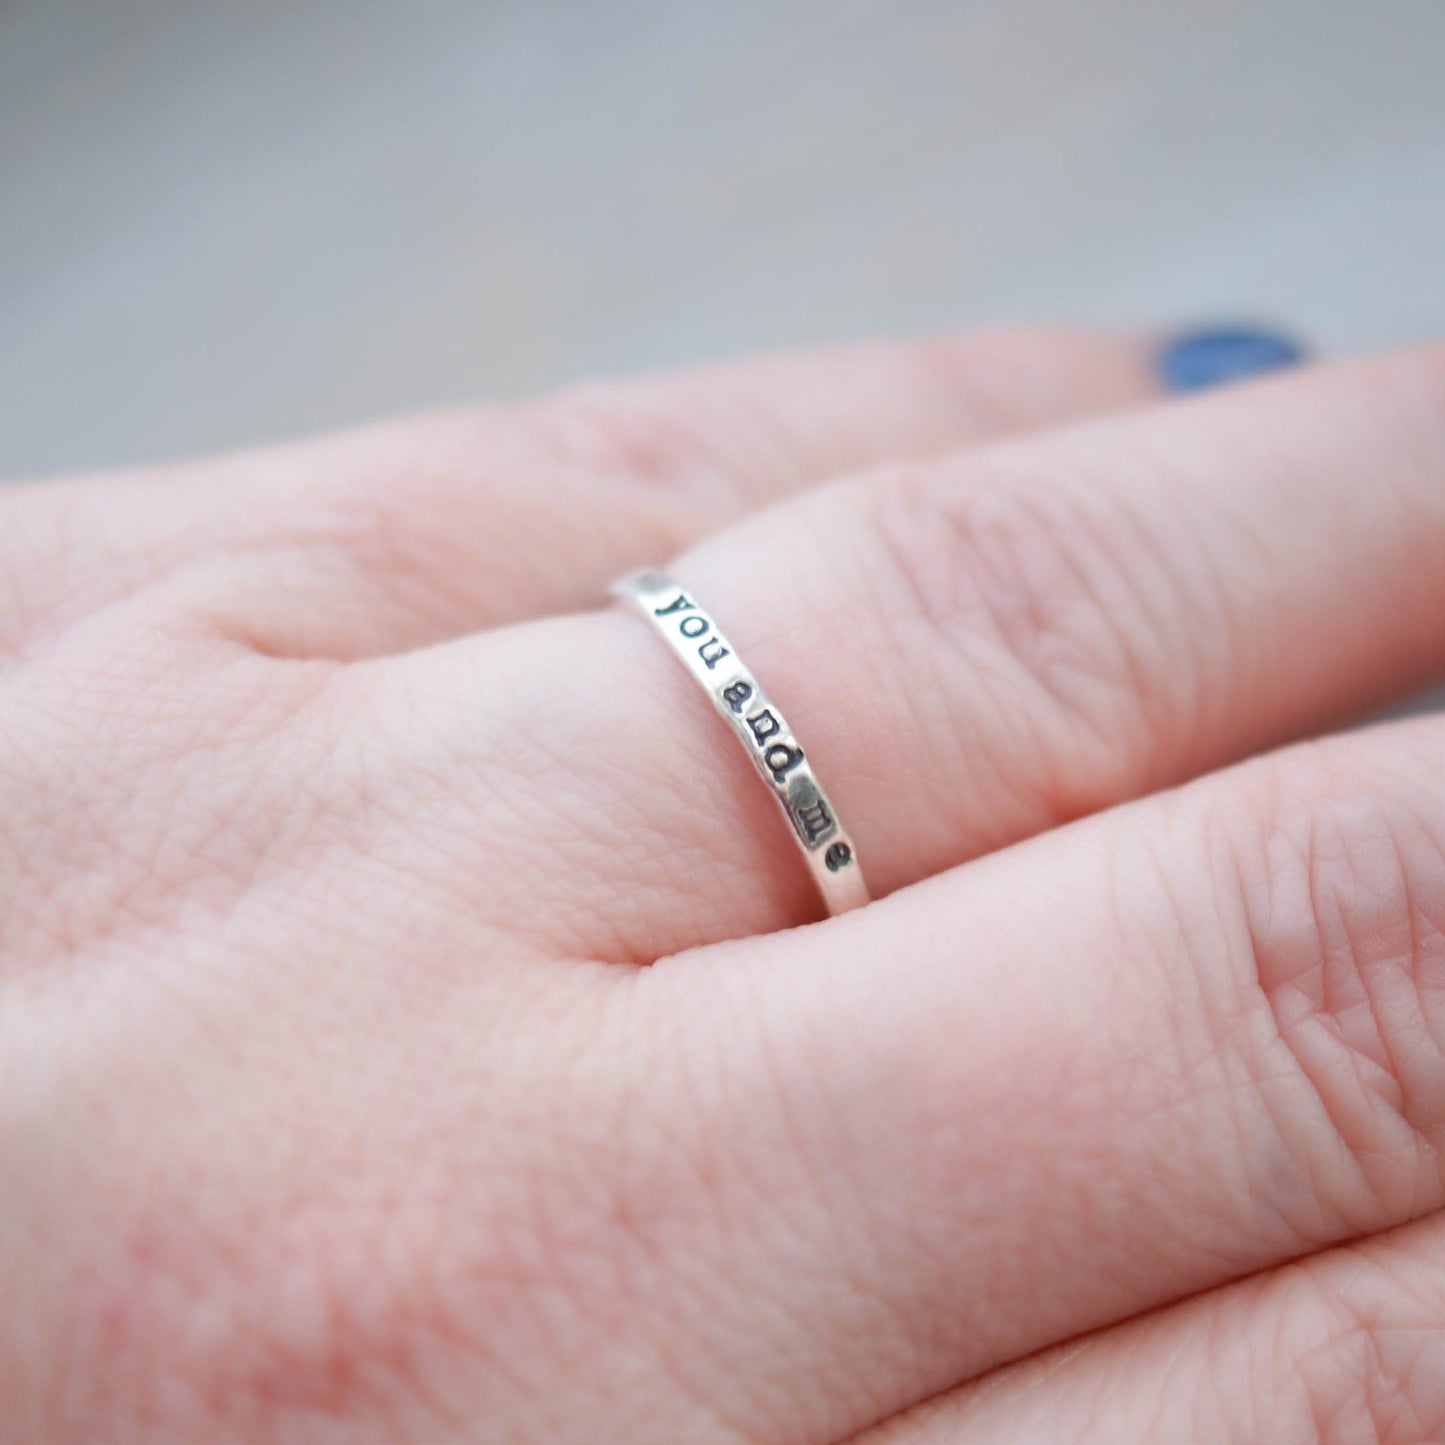 Skinny sterling silver ring stamped with you and me on hand